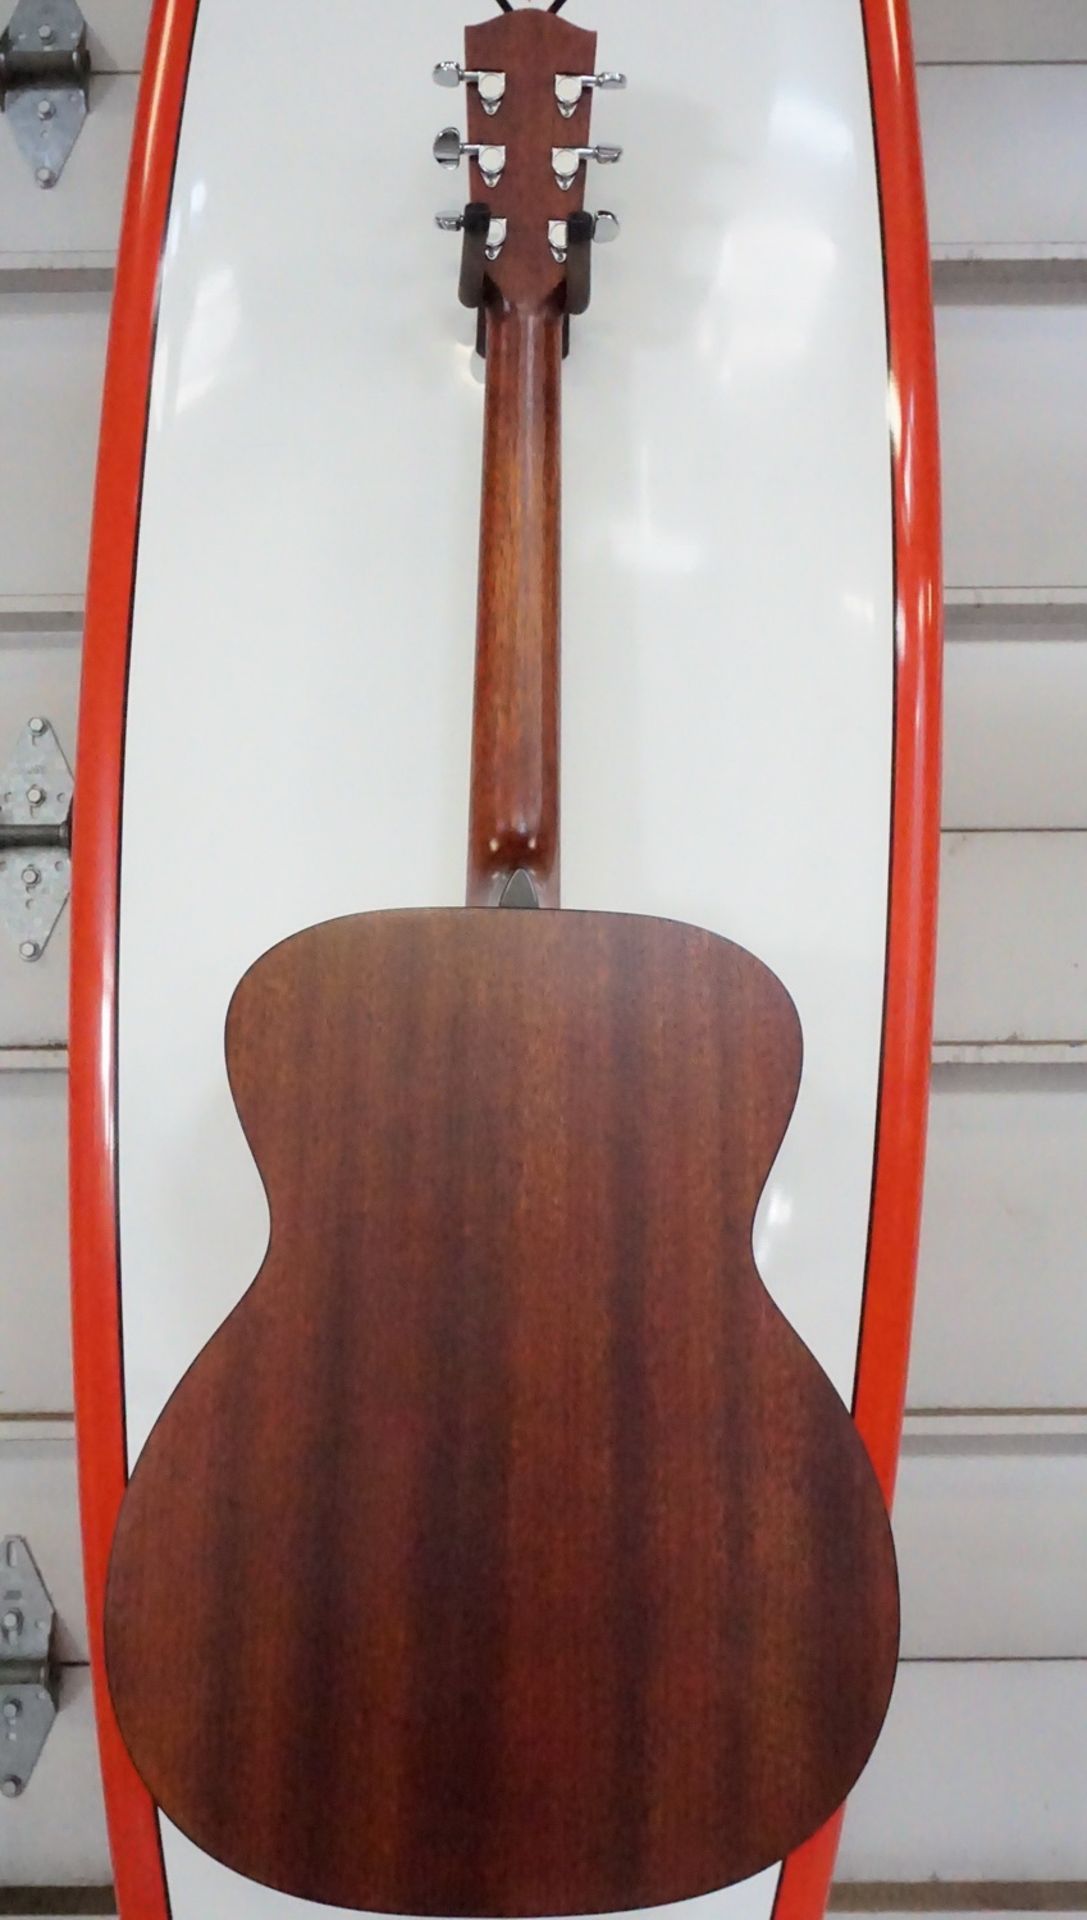 EASTMAN PCH1-0M MAHOGANY (ORCHESTRA MODEL) SOLID TIP ACOUSTIC GUITAR W/ BLACK HARDSHELL CASE - Image 4 of 4